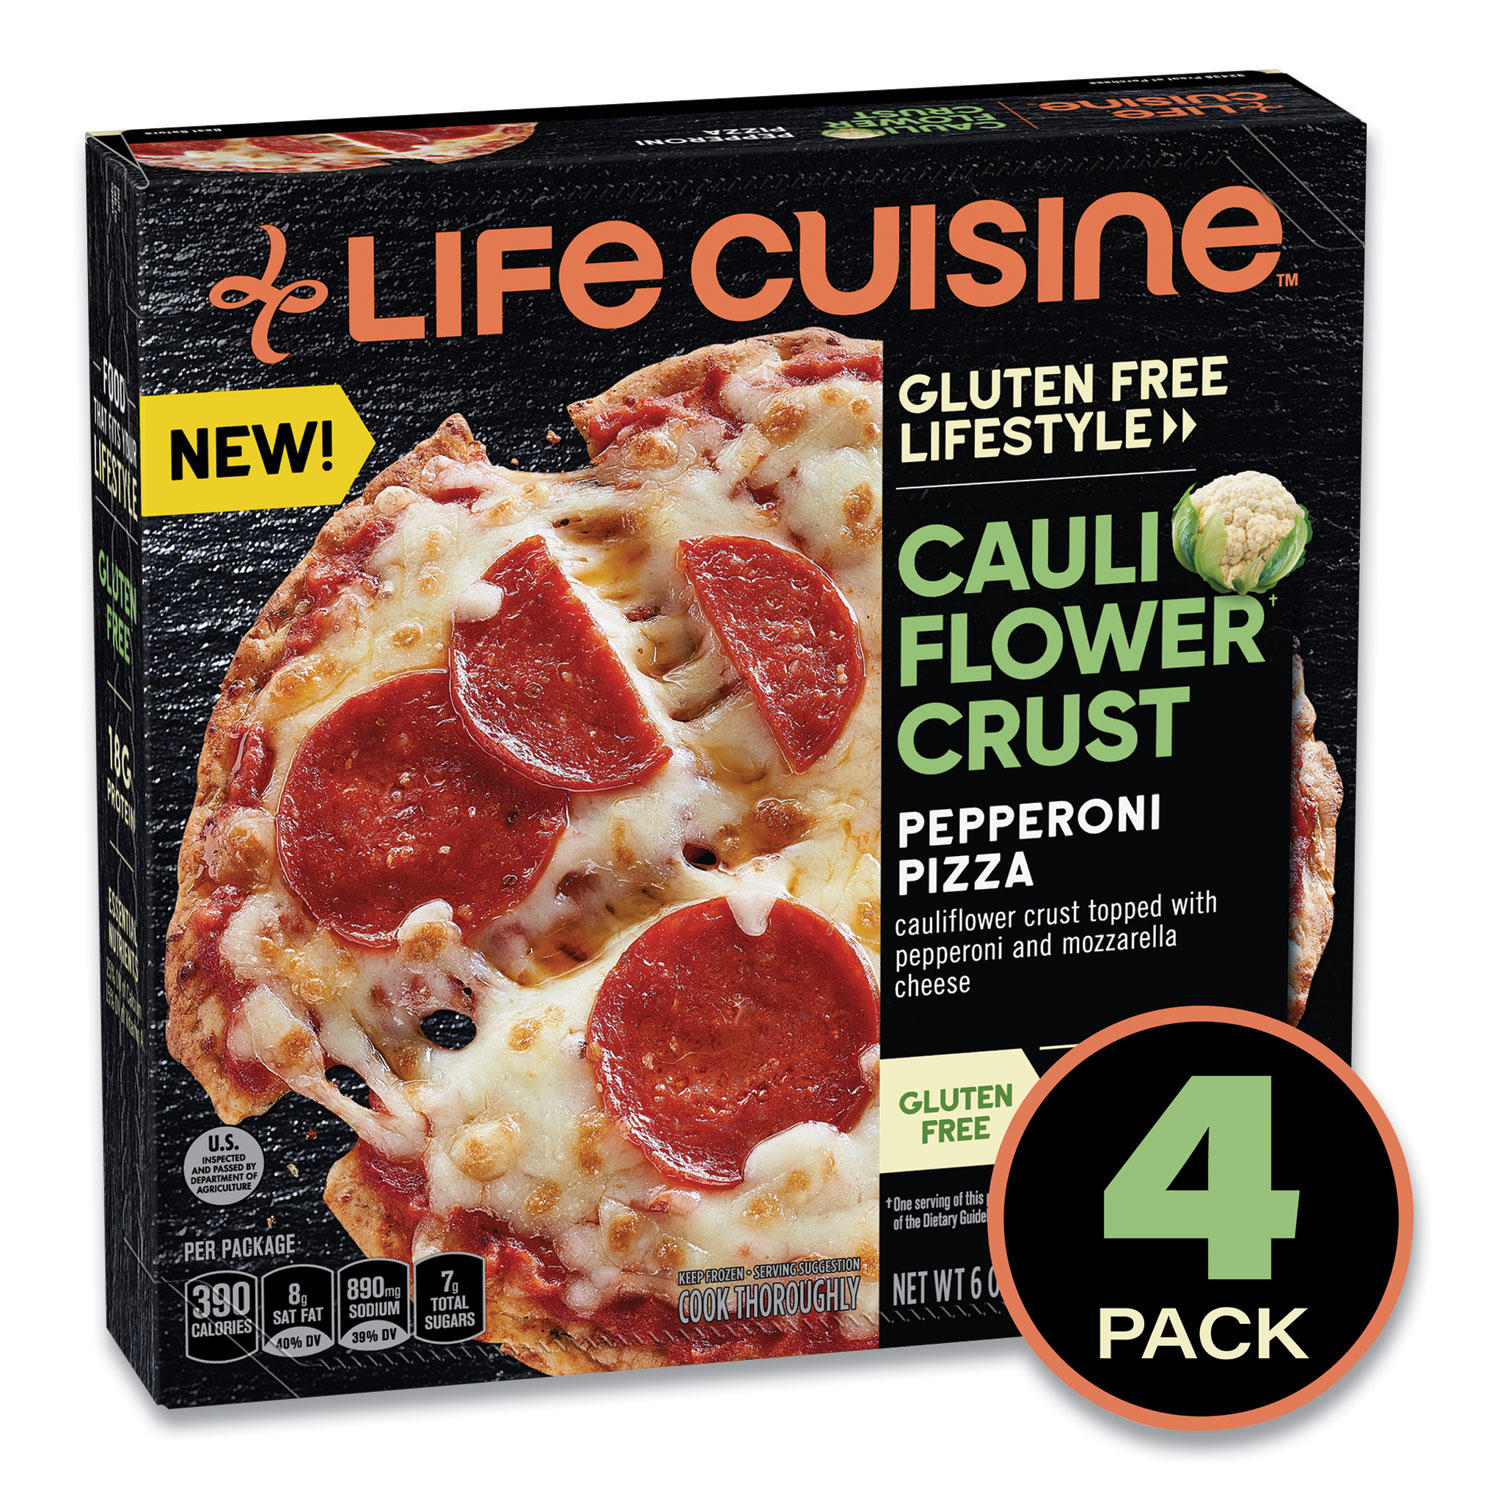  Life Cuisine 12437867 Gluten Free Lifestyle Cauliflower Crust Pepperoni Pizza, 6 oz, 4/Pack, Free Delivery in 1-4 Business Days (GRR90300204) 